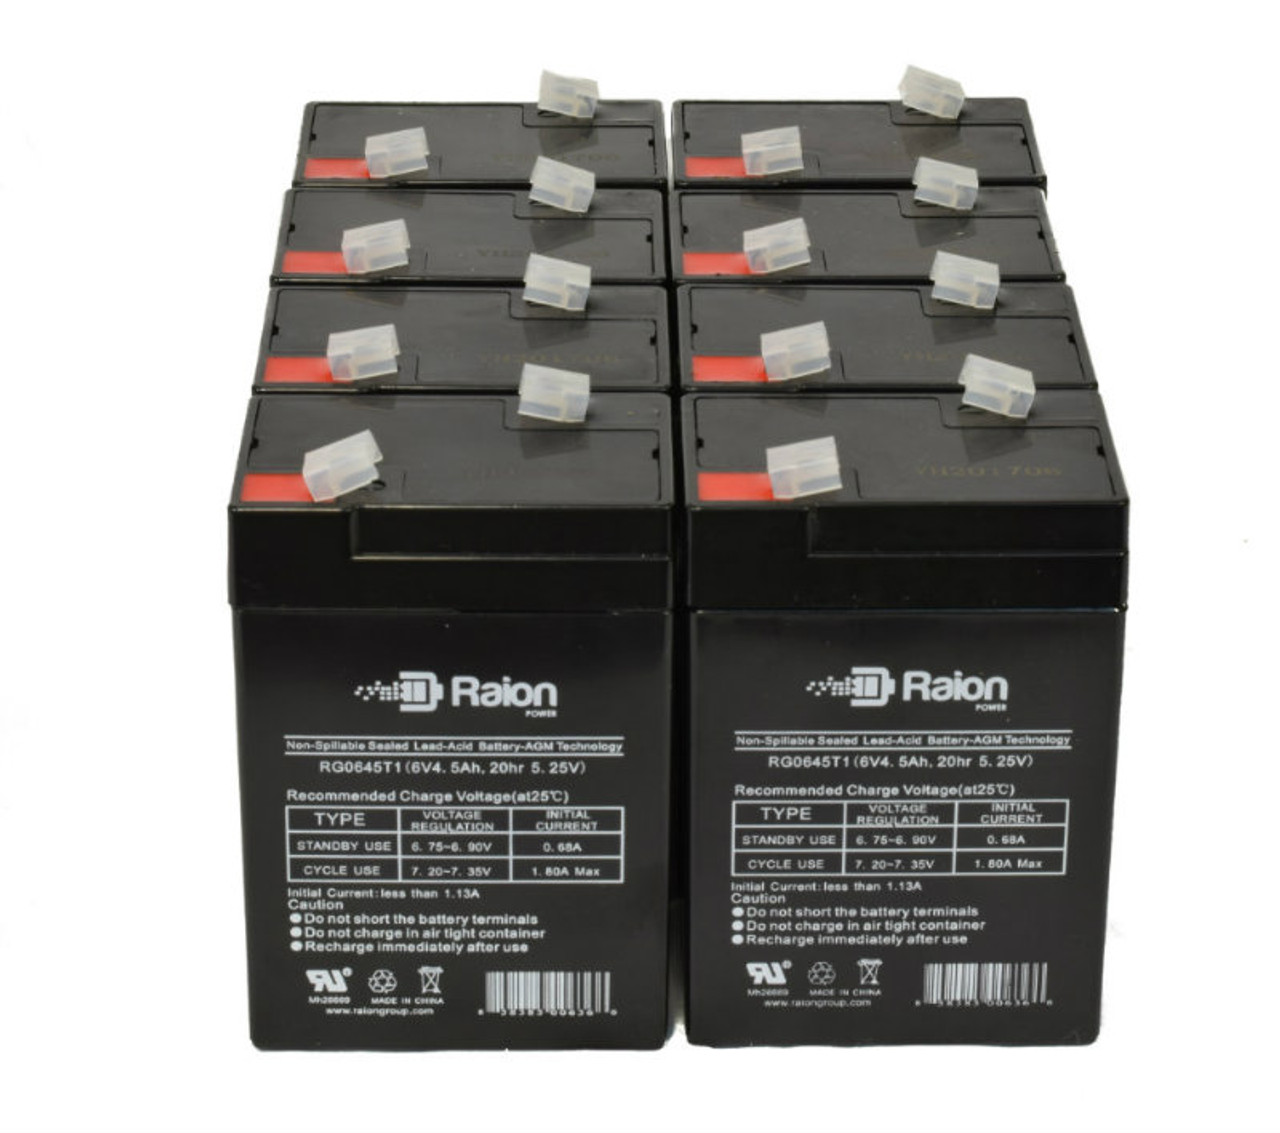 Raion Power 6 Volt 4.5Ah RG0645T1 Replacement Battery for Leadhoo NP4.5-6 - 8 Pack